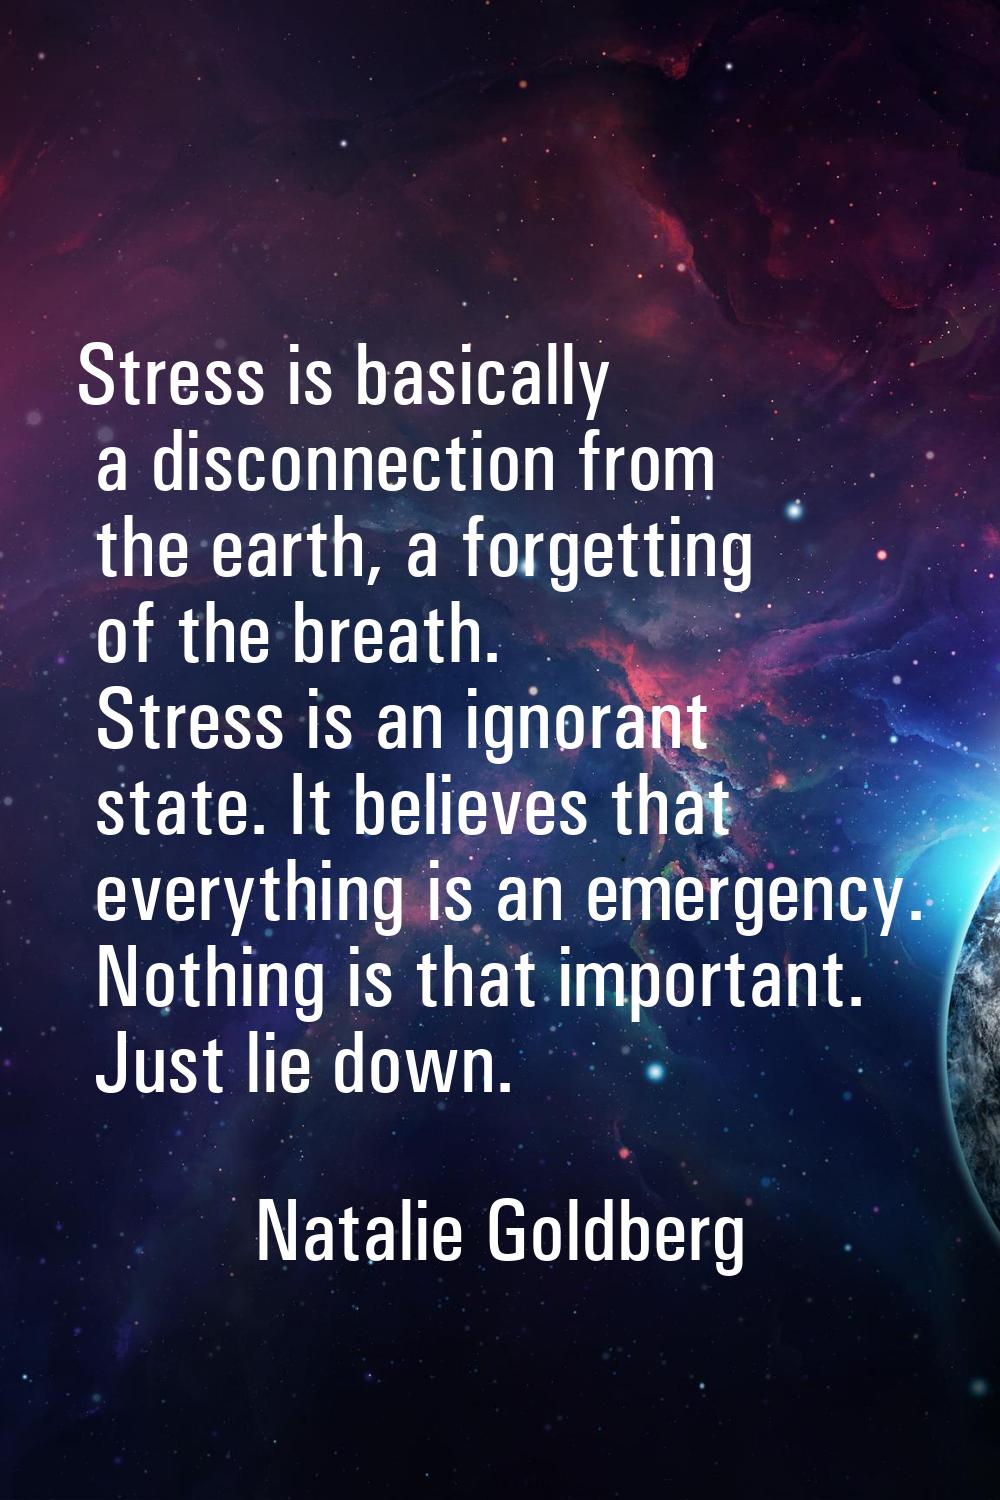 Stress is basically a disconnection from the earth, a forgetting of the breath. Stress is an ignora